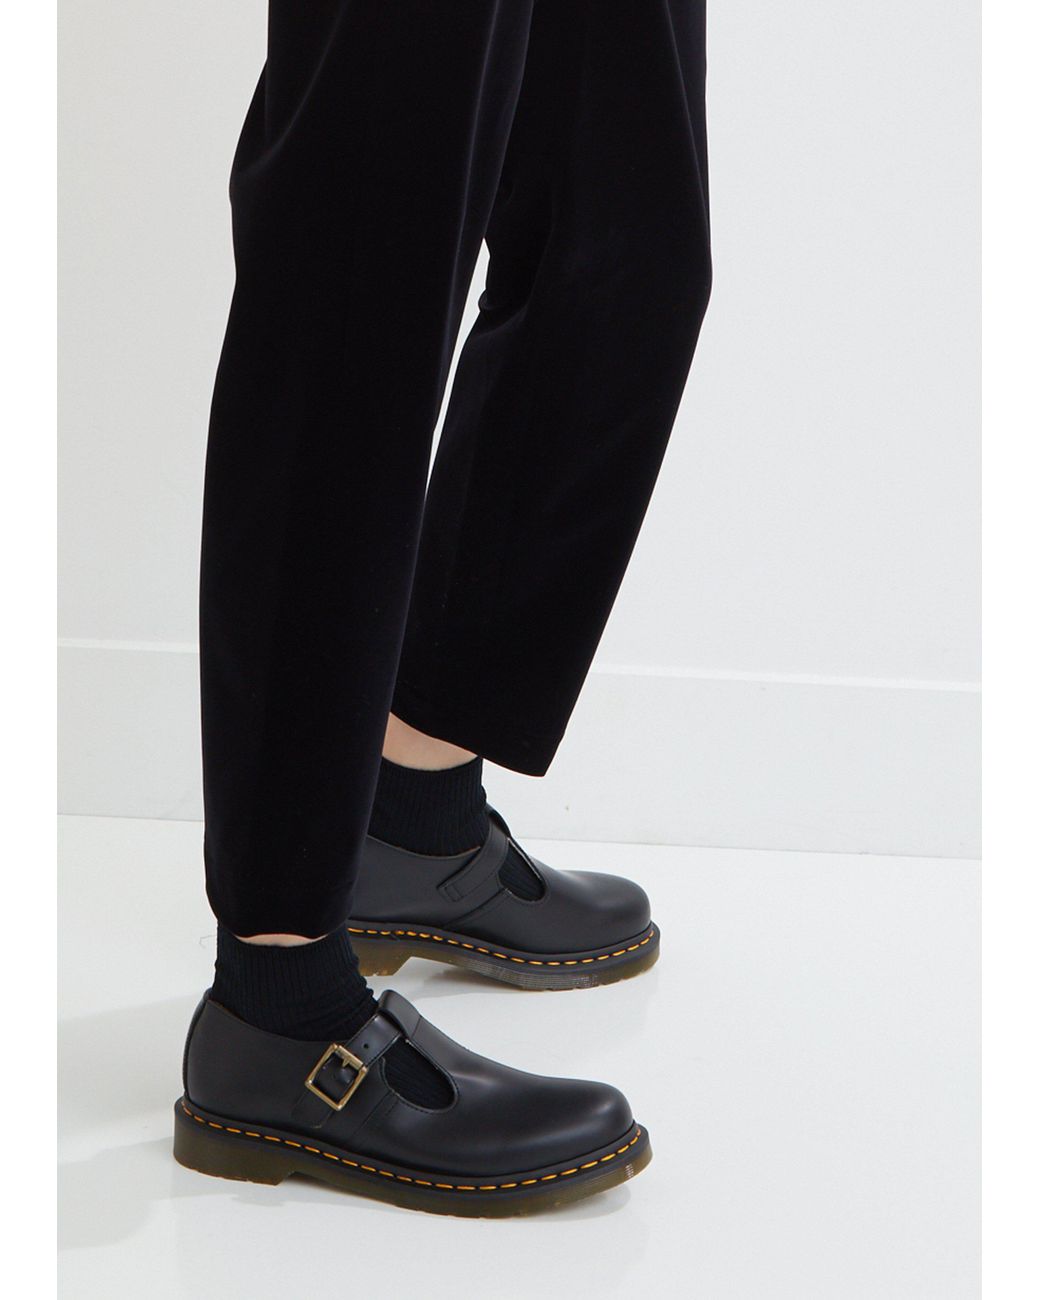 Dr. Martens Leather Polley T Bar Mary Janes in Black | Lyst